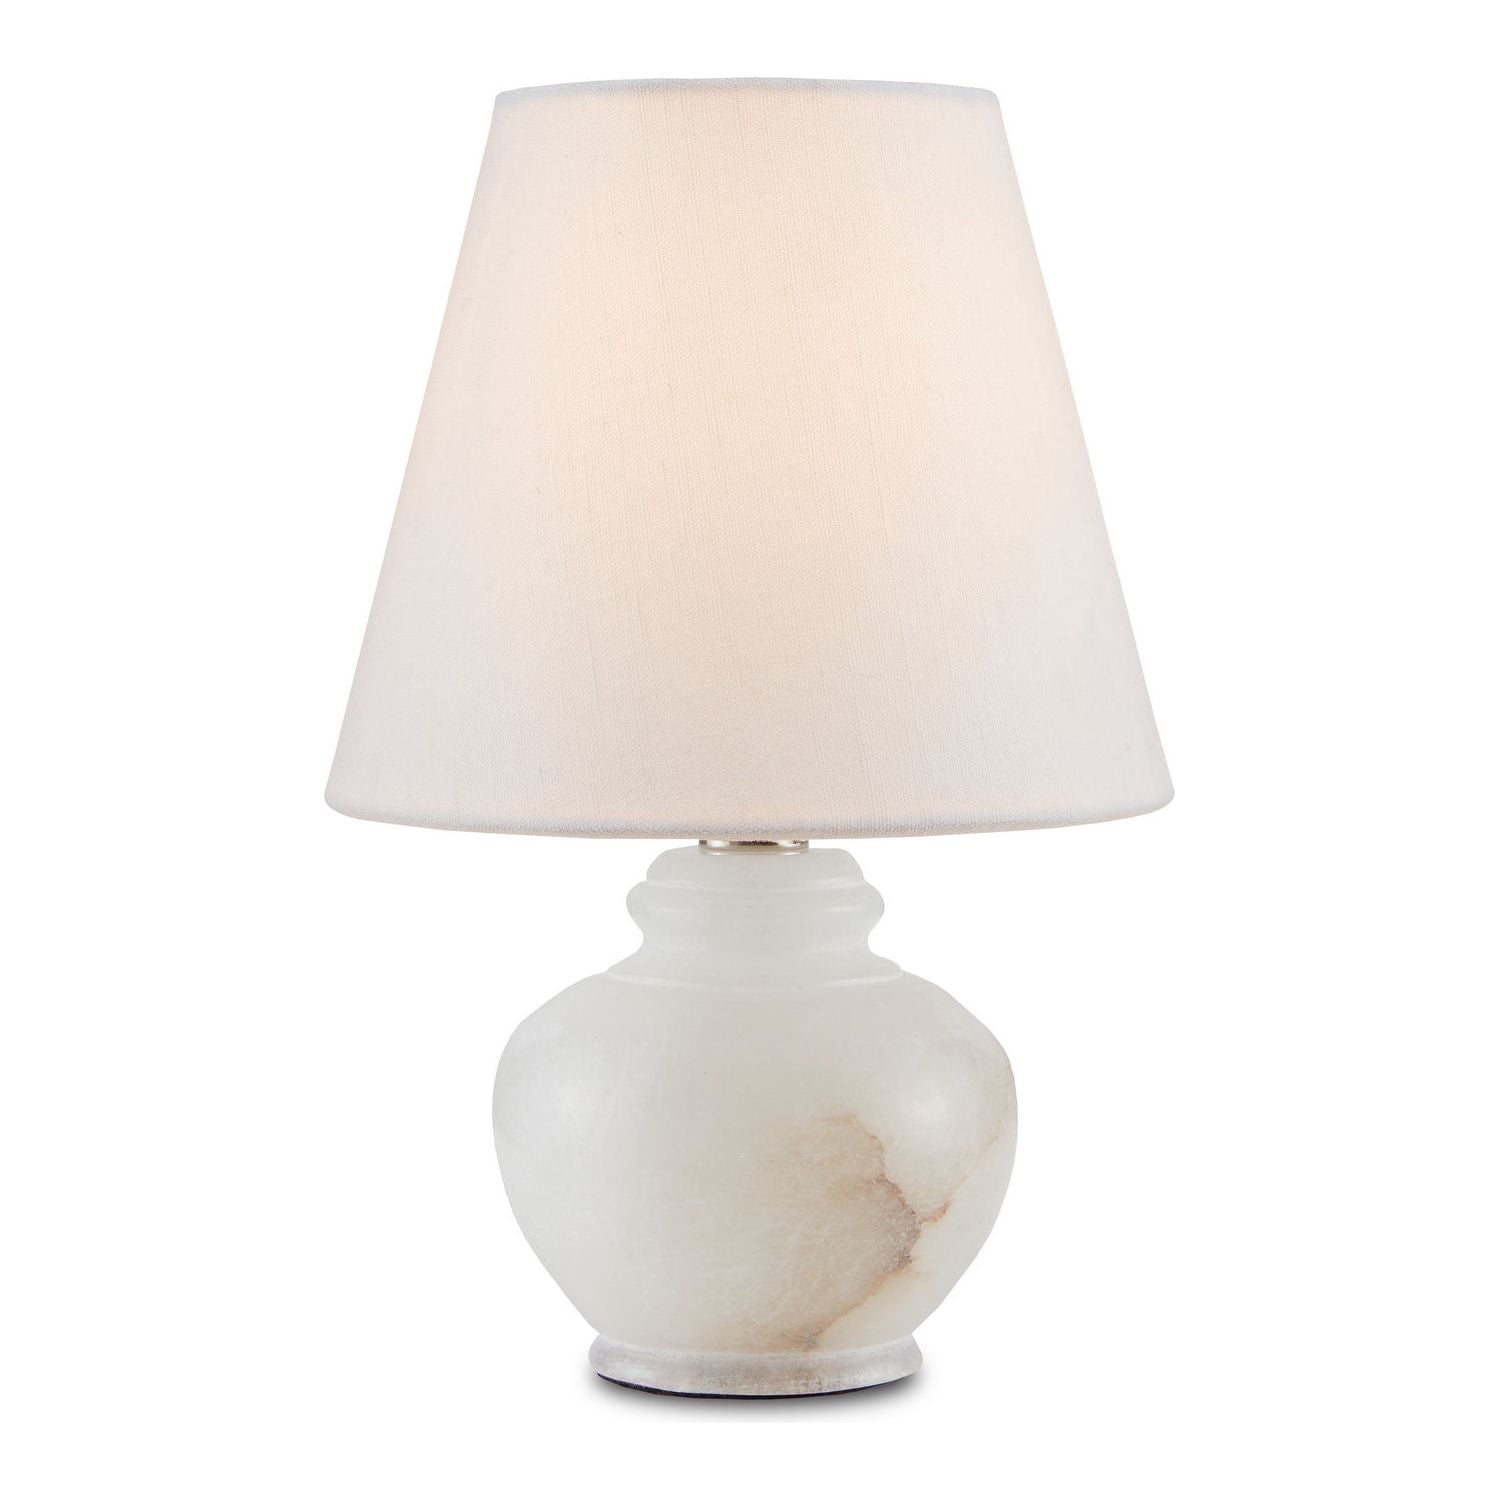 Currey and Company - 6000-0761 - One Light Table Lamp - Piccolo - Natural/Alabaster